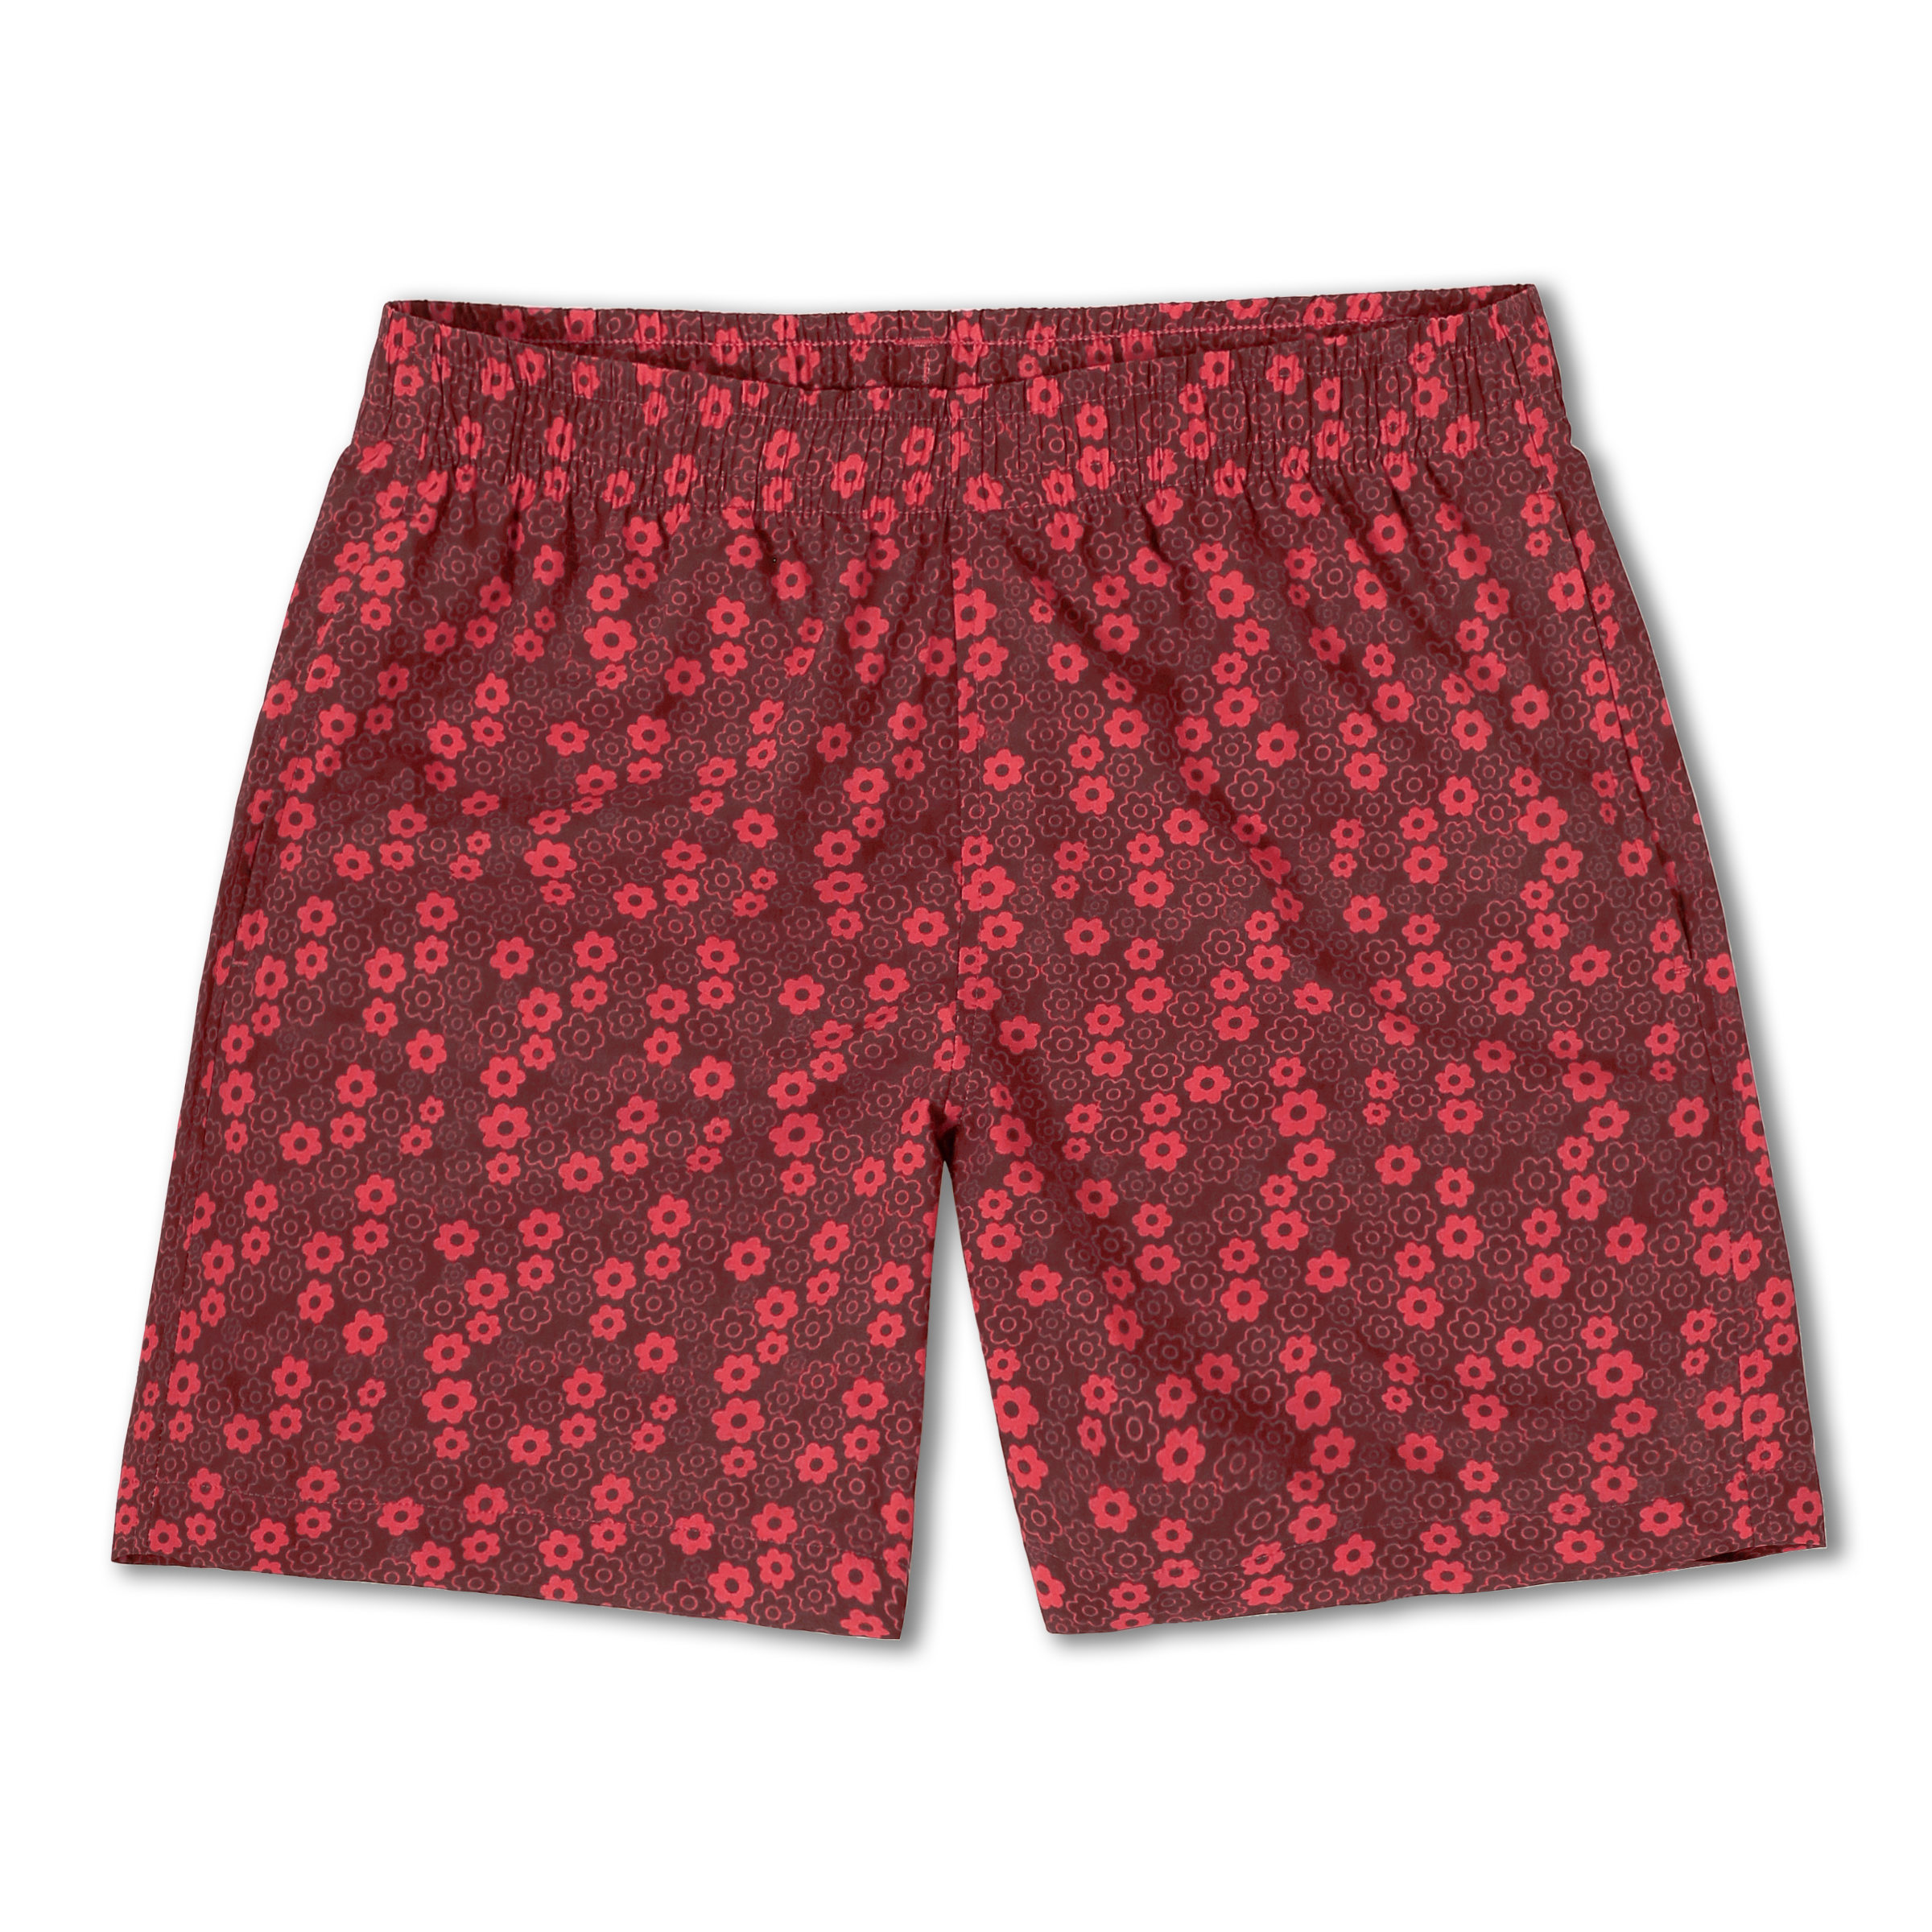 Cabana Short 5.5" Poppy a red print with small darker and lighter poppy flowers on a short with an elastic waistband and two side seam pockets